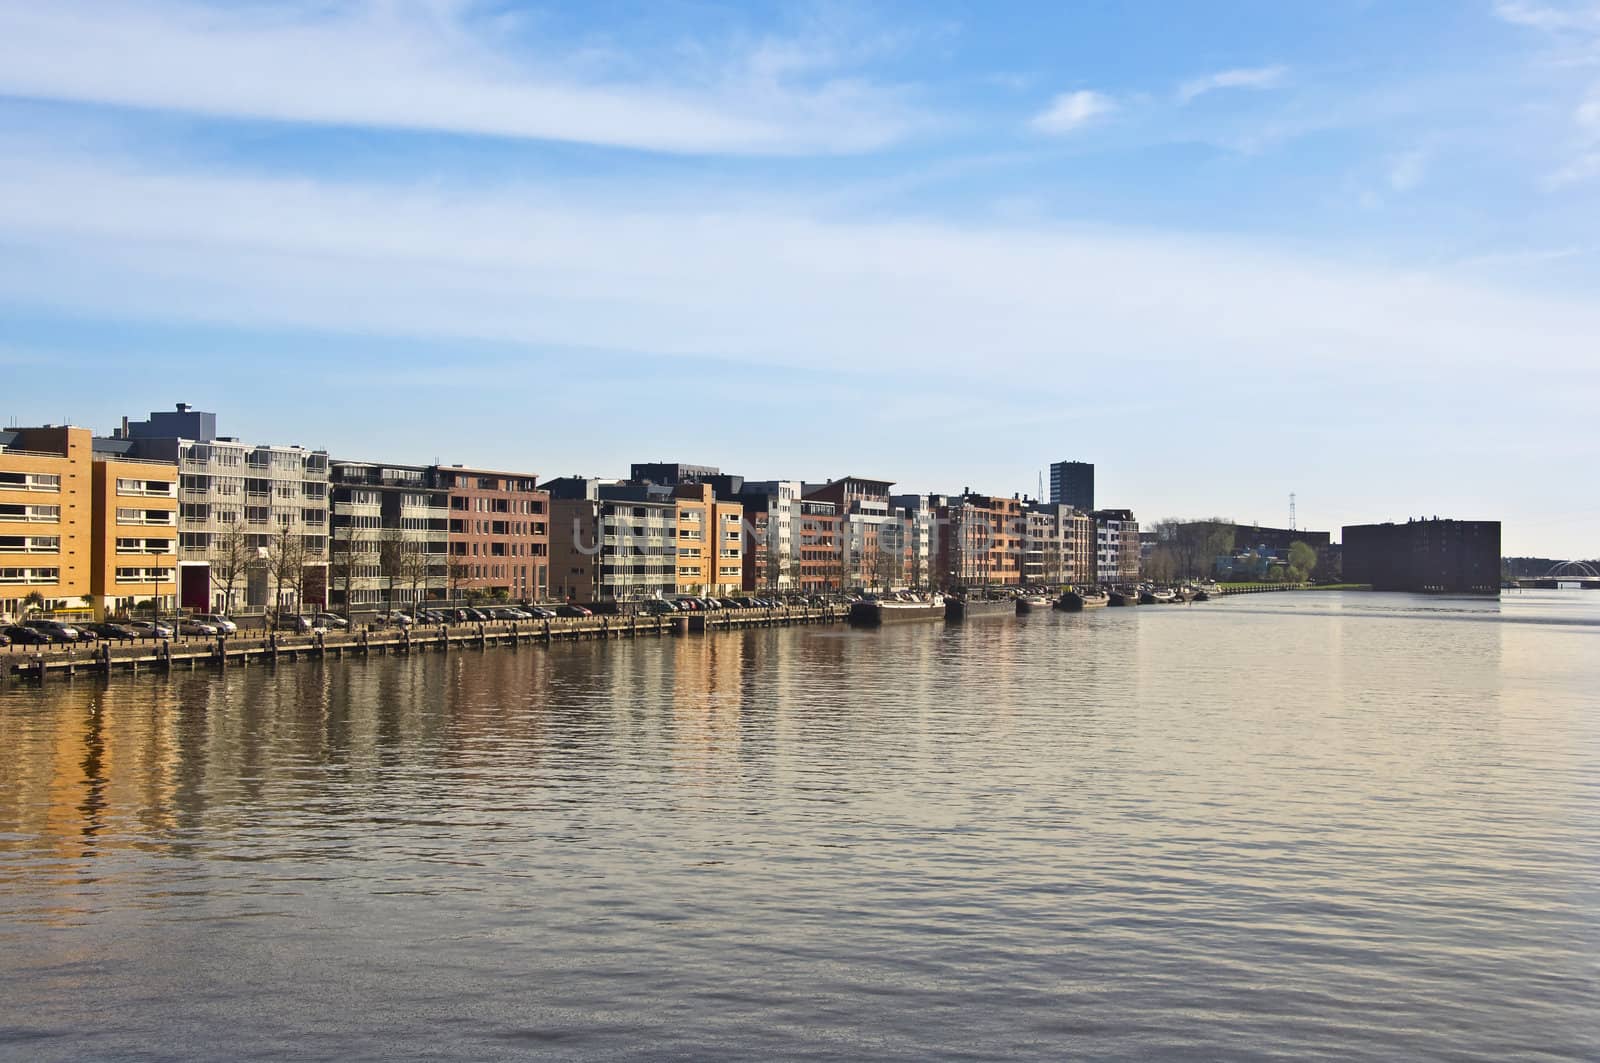 Modern architecture in Amsterdam. Island of Borneo. Modern housing is reflected in the water against the blue sky.